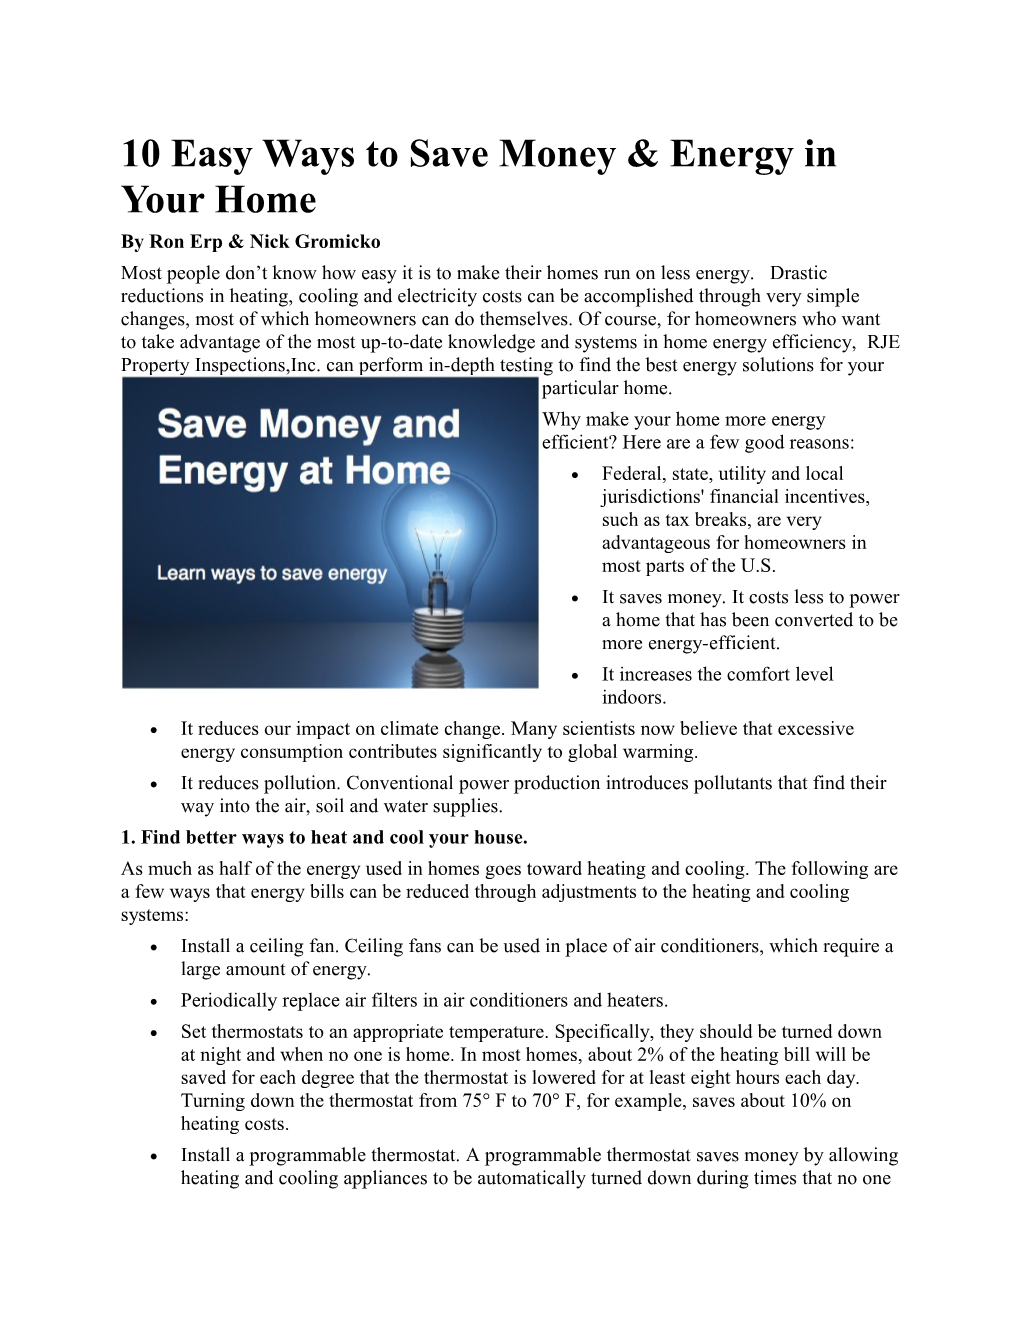 10 Easy Ways to Save Money & Energy in Your Home